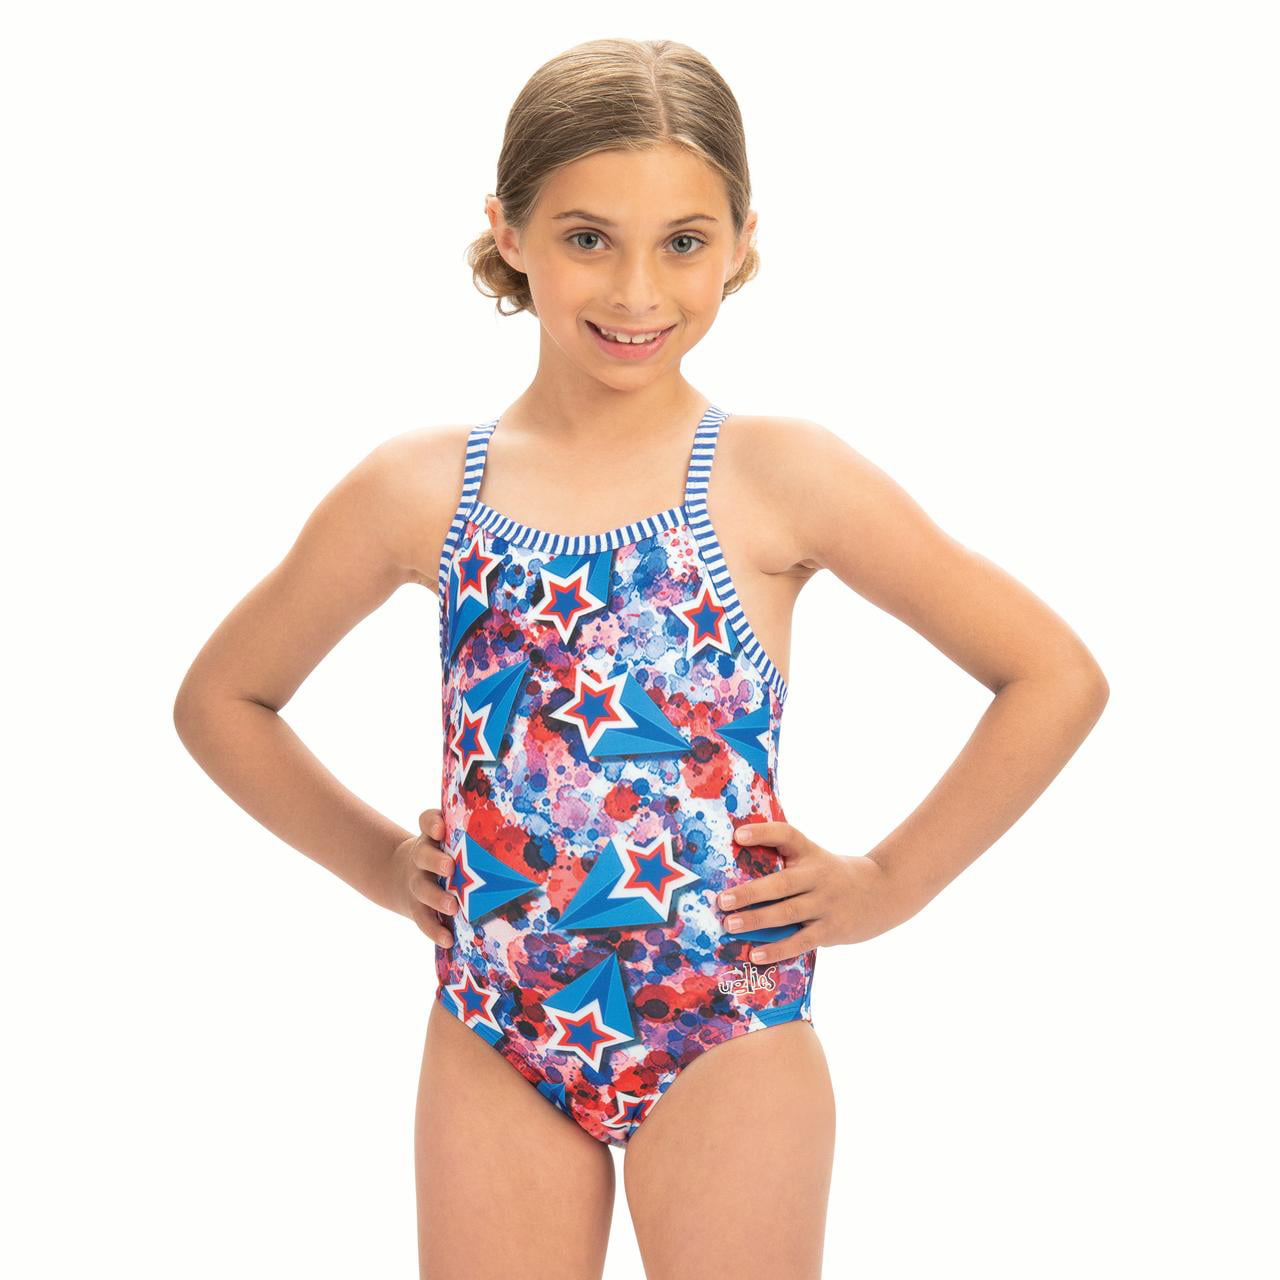 Maru Girls Solid Pacer Swimsuit Swimming Lesson Costume Swimwear Ages 4-16 New 